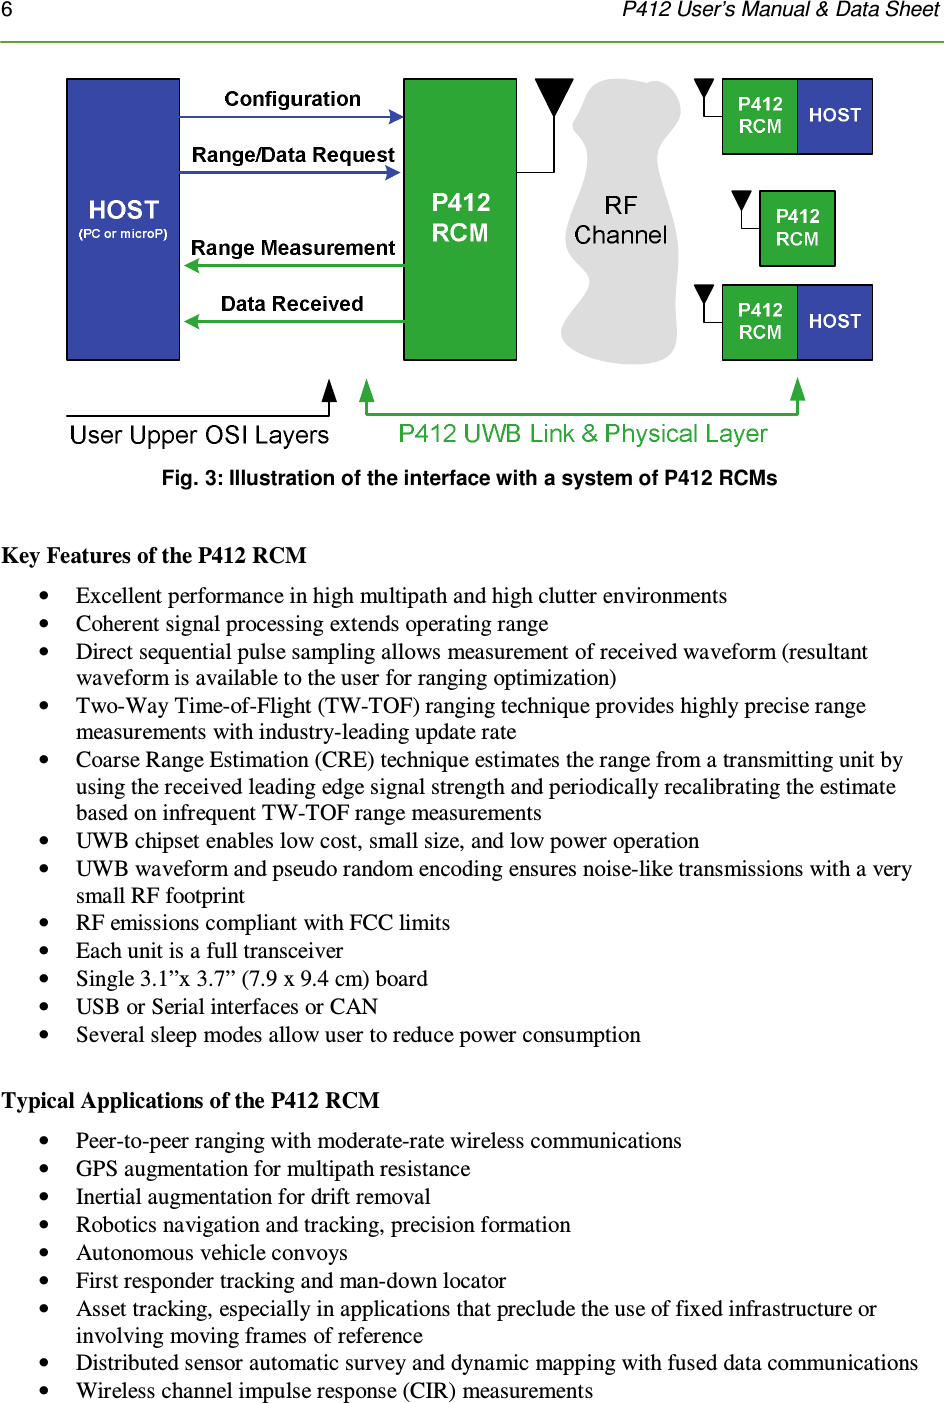 6    P412 User’s Manual &amp; Data Sheet   Fig. 3: Illustration of the interface with a system of P412 RCMs  Key Features of the P412 RCM • Excellent performance in high multipath and high clutter environments • Coherent signal processing extends operating range • Direct sequential pulse sampling allows measurement of received waveform (resultant waveform is available to the user for ranging optimization) • Two-Way Time-of-Flight (TW-TOF) ranging technique provides highly precise range measurements with industry-leading update rate • Coarse Range Estimation (CRE) technique estimates the range from a transmitting unit by using the received leading edge signal strength and periodically recalibrating the estimate based on infrequent TW-TOF range measurements • UWB chipset enables low cost, small size, and low power operation • UWB waveform and pseudo random encoding ensures noise-like transmissions with a very small RF footprint • RF emissions compliant with FCC limits  • Each unit is a full transceiver • Single 3.1”x 3.7” (7.9 x 9.4 cm) board • USB or Serial interfaces or CAN • Several sleep modes allow user to reduce power consumption   Typical Applications of the P412 RCM • Peer-to-peer ranging with moderate-rate wireless communications • GPS augmentation for multipath resistance • Inertial augmentation for drift removal • Robotics navigation and tracking, precision formation • Autonomous vehicle convoys • First responder tracking and man-down locator • Asset tracking, especially in applications that preclude the use of fixed infrastructure or involving moving frames of reference  • Distributed sensor automatic survey and dynamic mapping with fused data communications • Wireless channel impulse response (CIR) measurements 